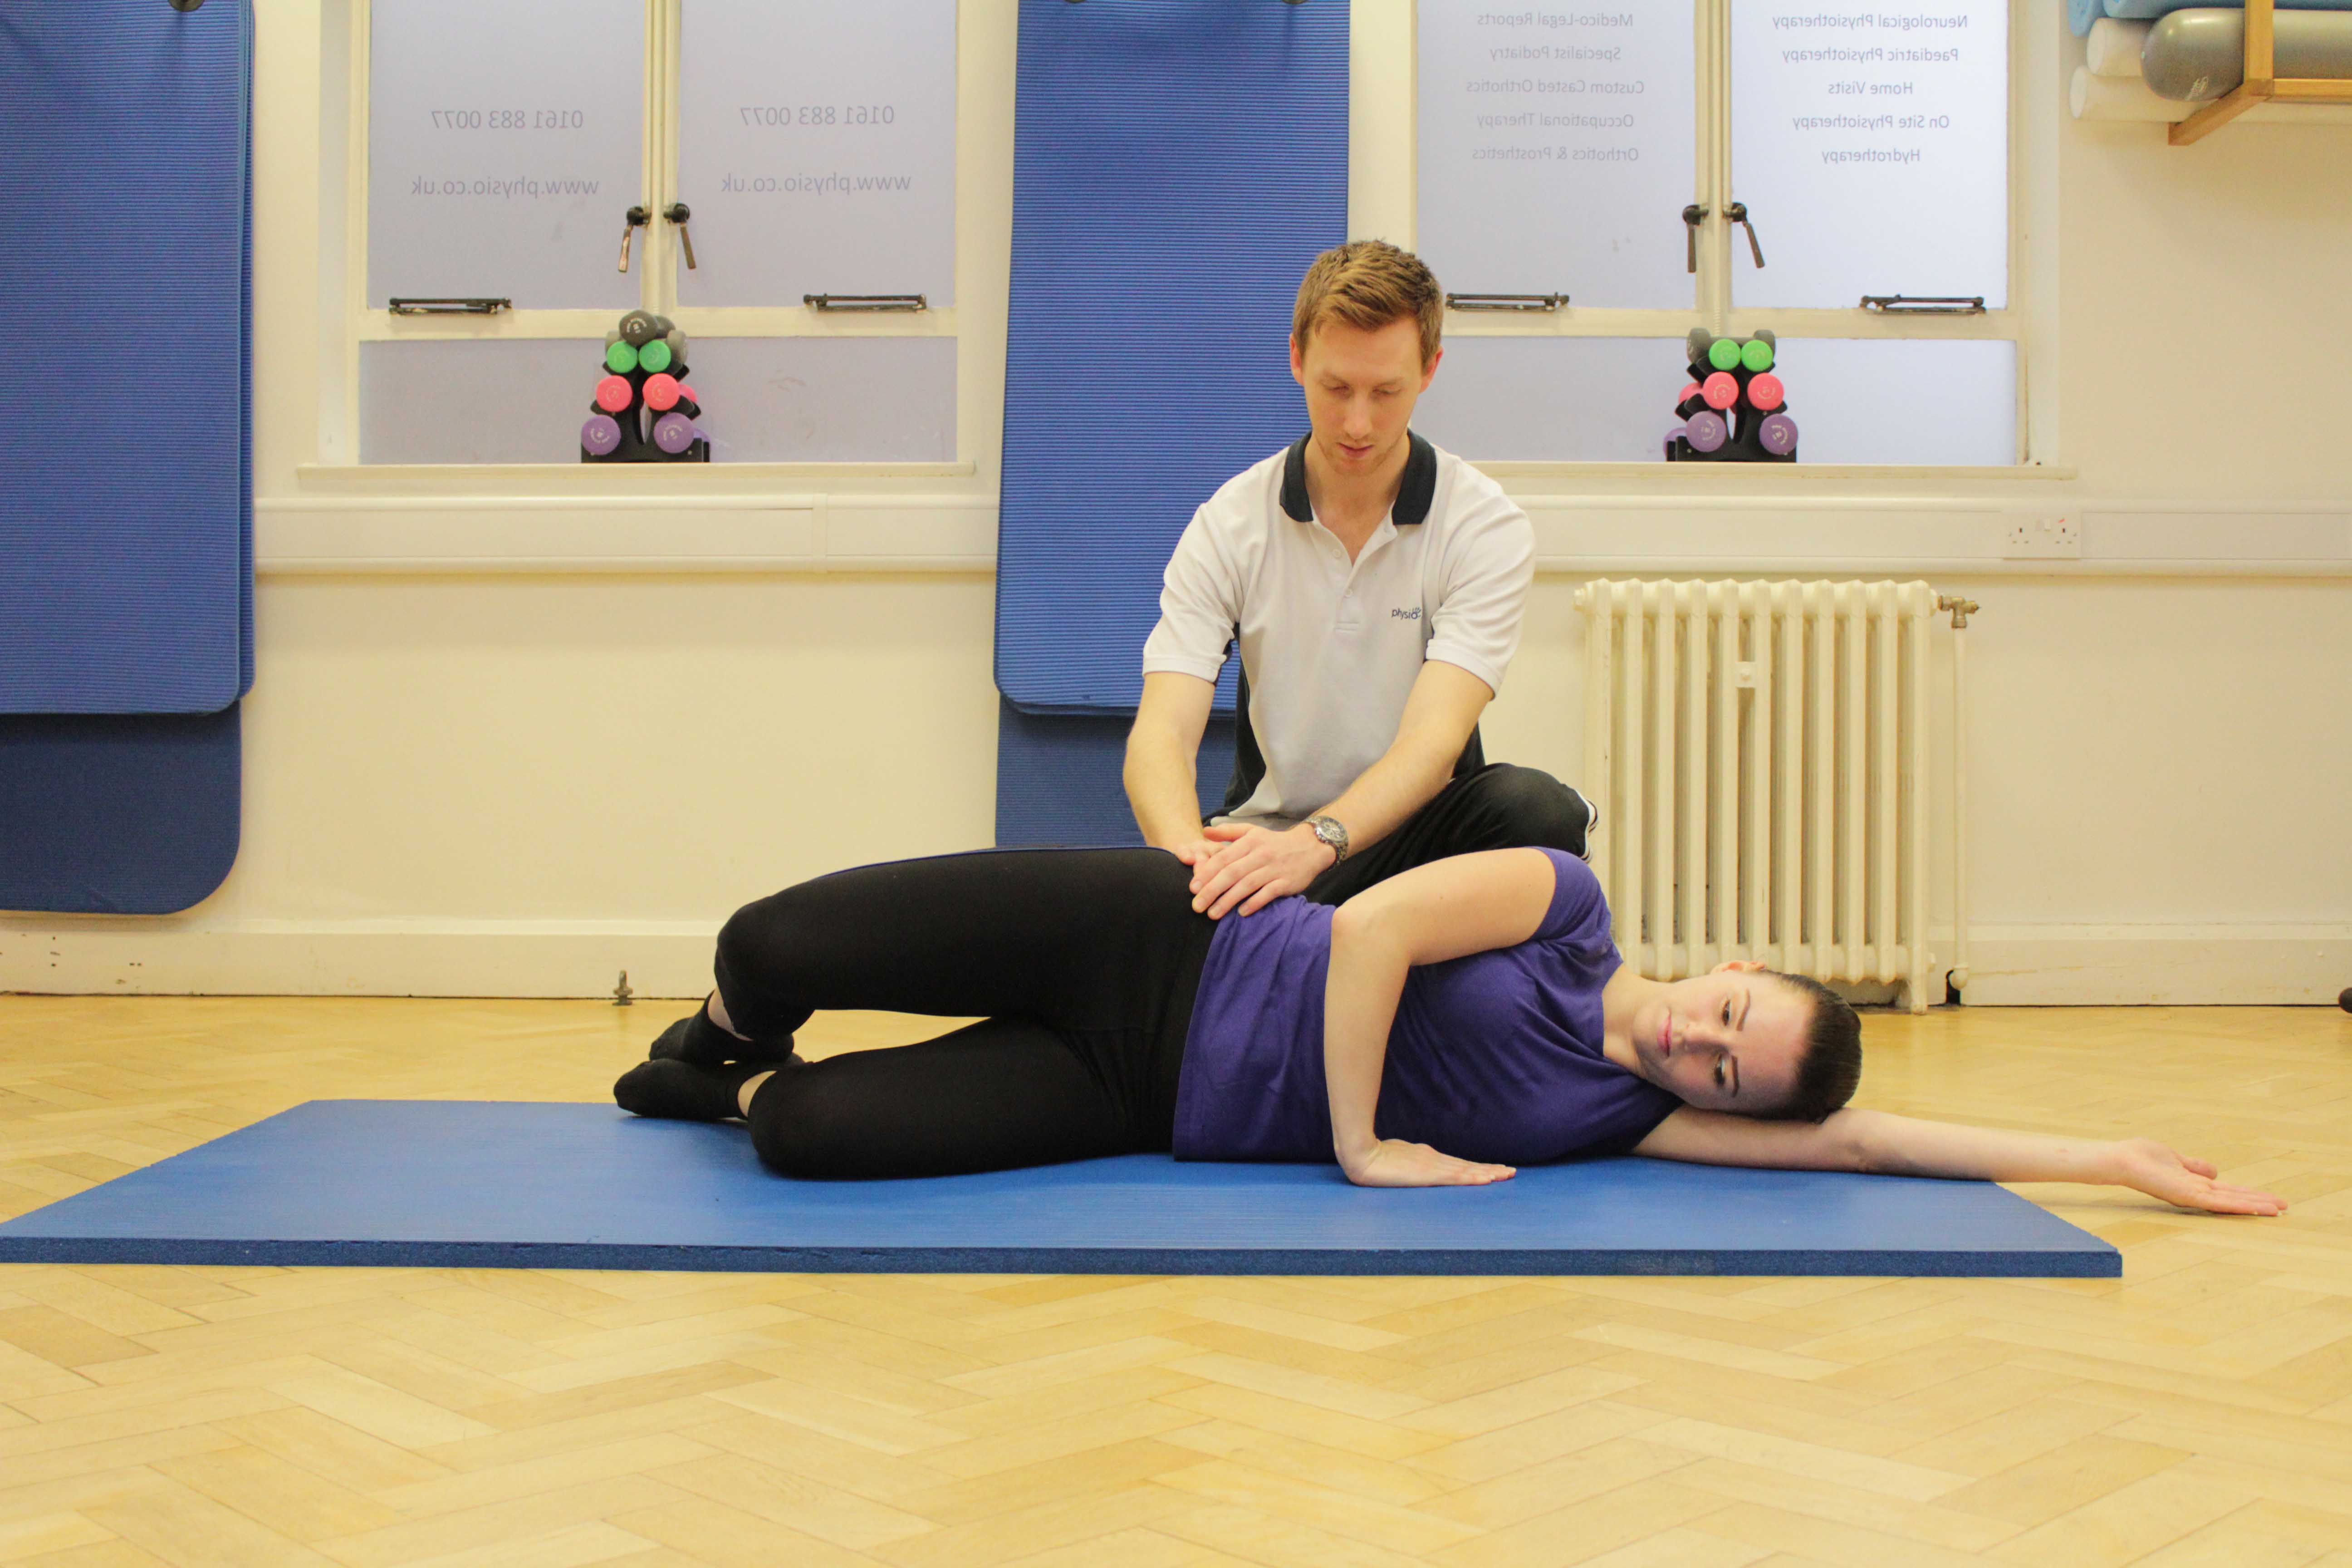 Strengthening exercises for the gluteus muscles supervised by a therapist